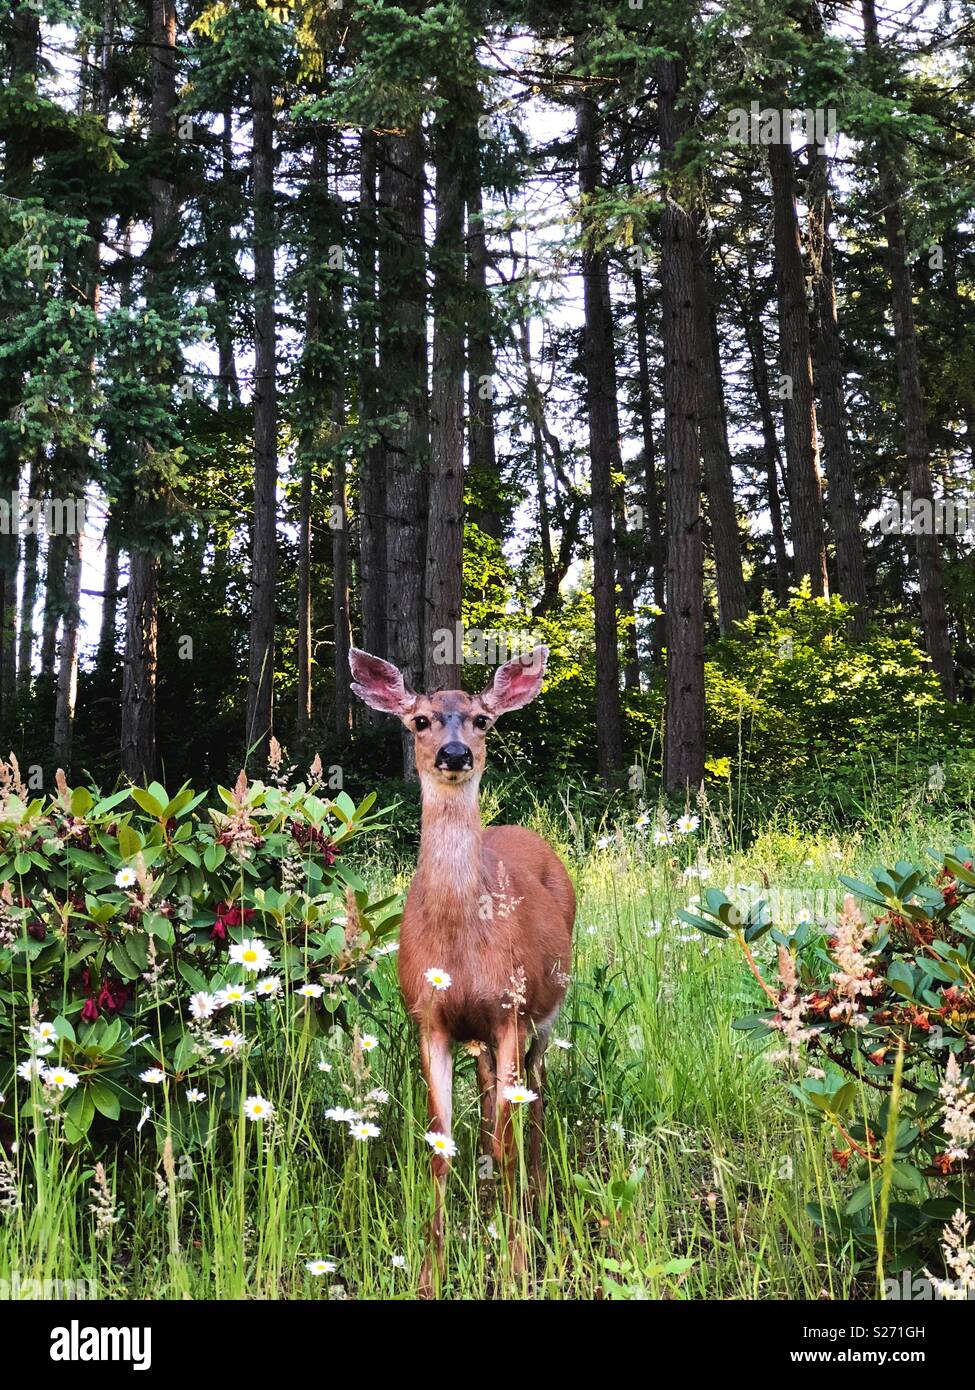 A deer standing in a meadow next to a forest, looking into camera. Stock Photo